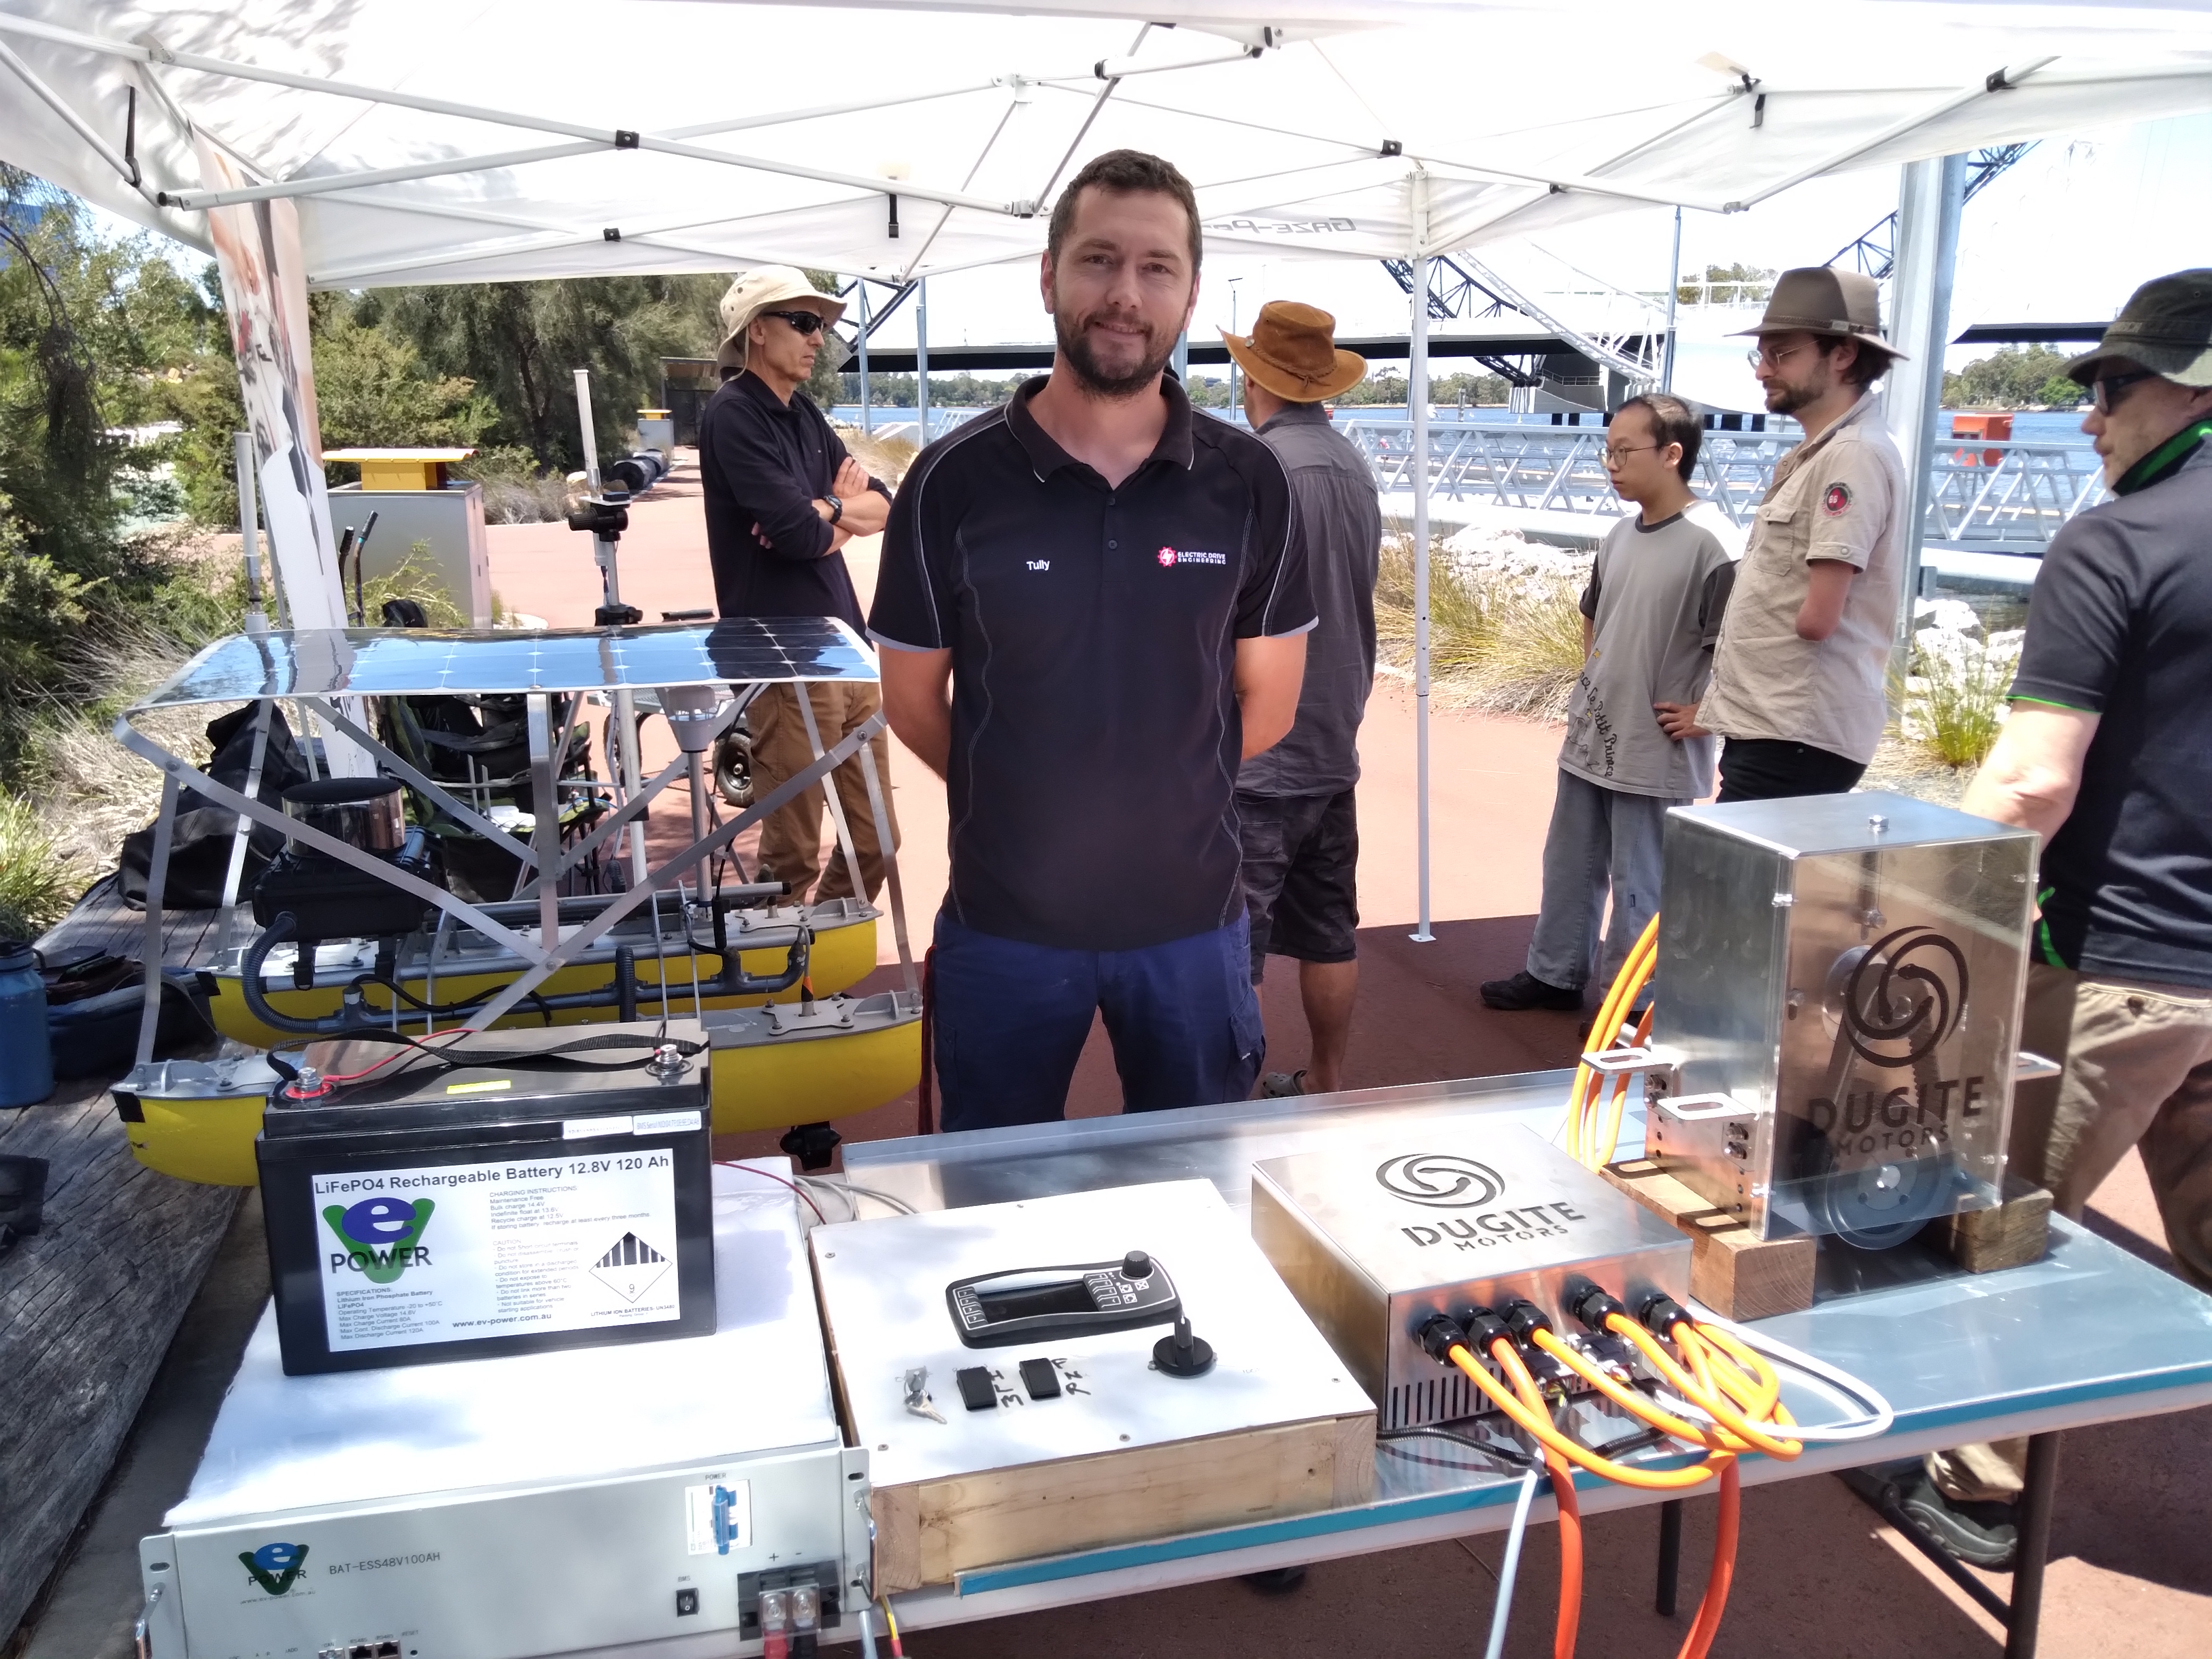 Tully from Electric Drive Engineering displays the inboard motor powertrain for boats